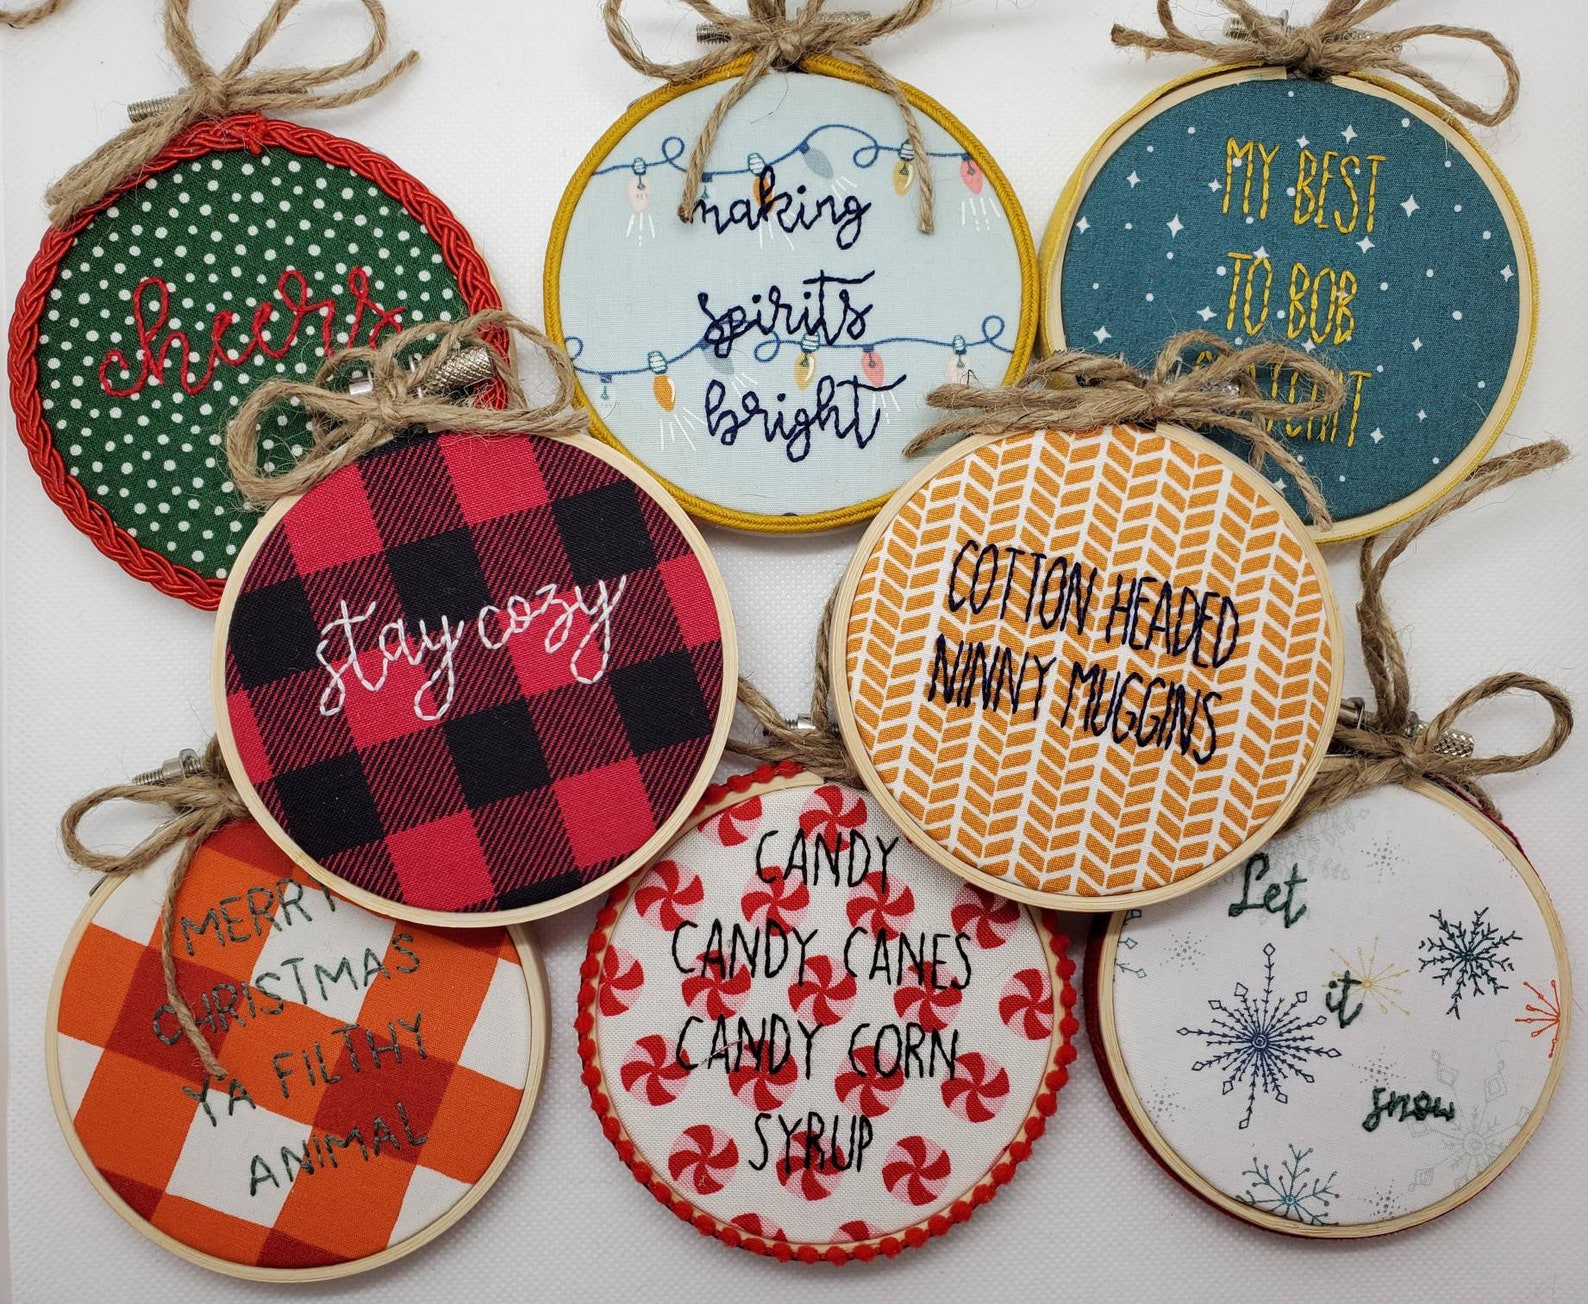 Hand stitched embroidery hoop ornaments: Cool gifts for adults under $15